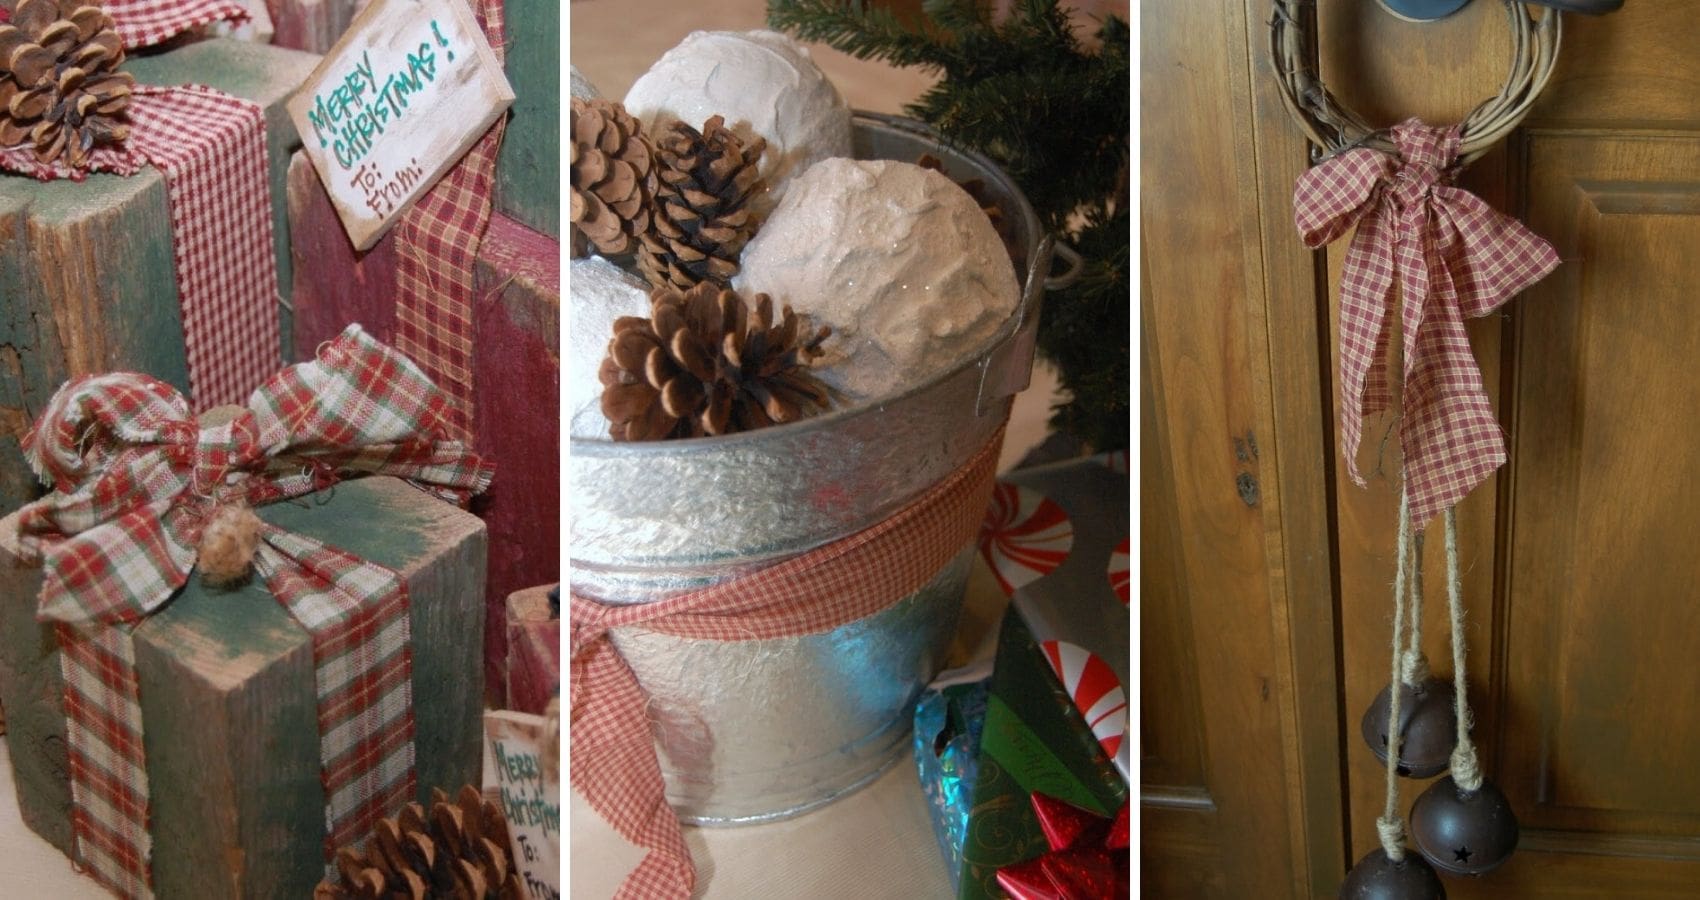 47 DIY Projects That Are Easy and Crazy Fun to Make - Craftsy Hacks